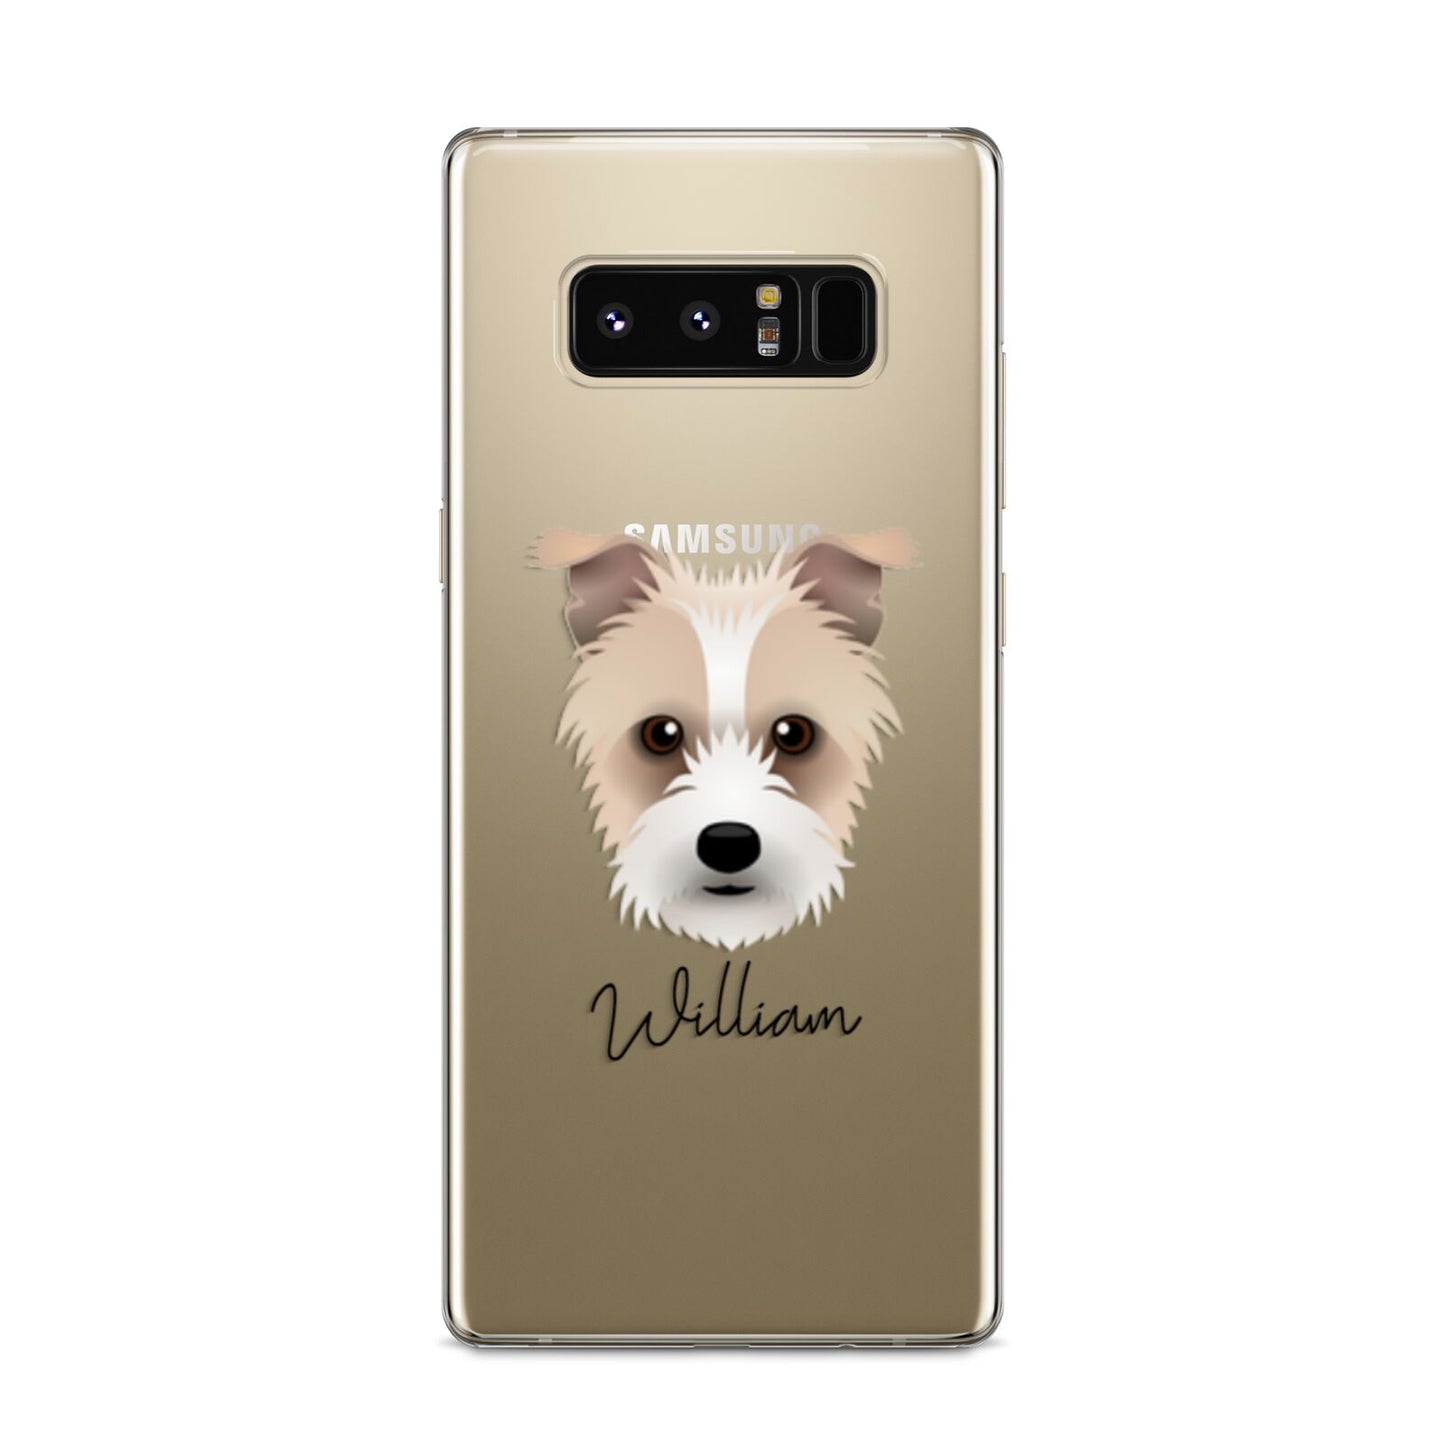 Sporting Lucas Terrier Personalised Samsung Galaxy S8 Case